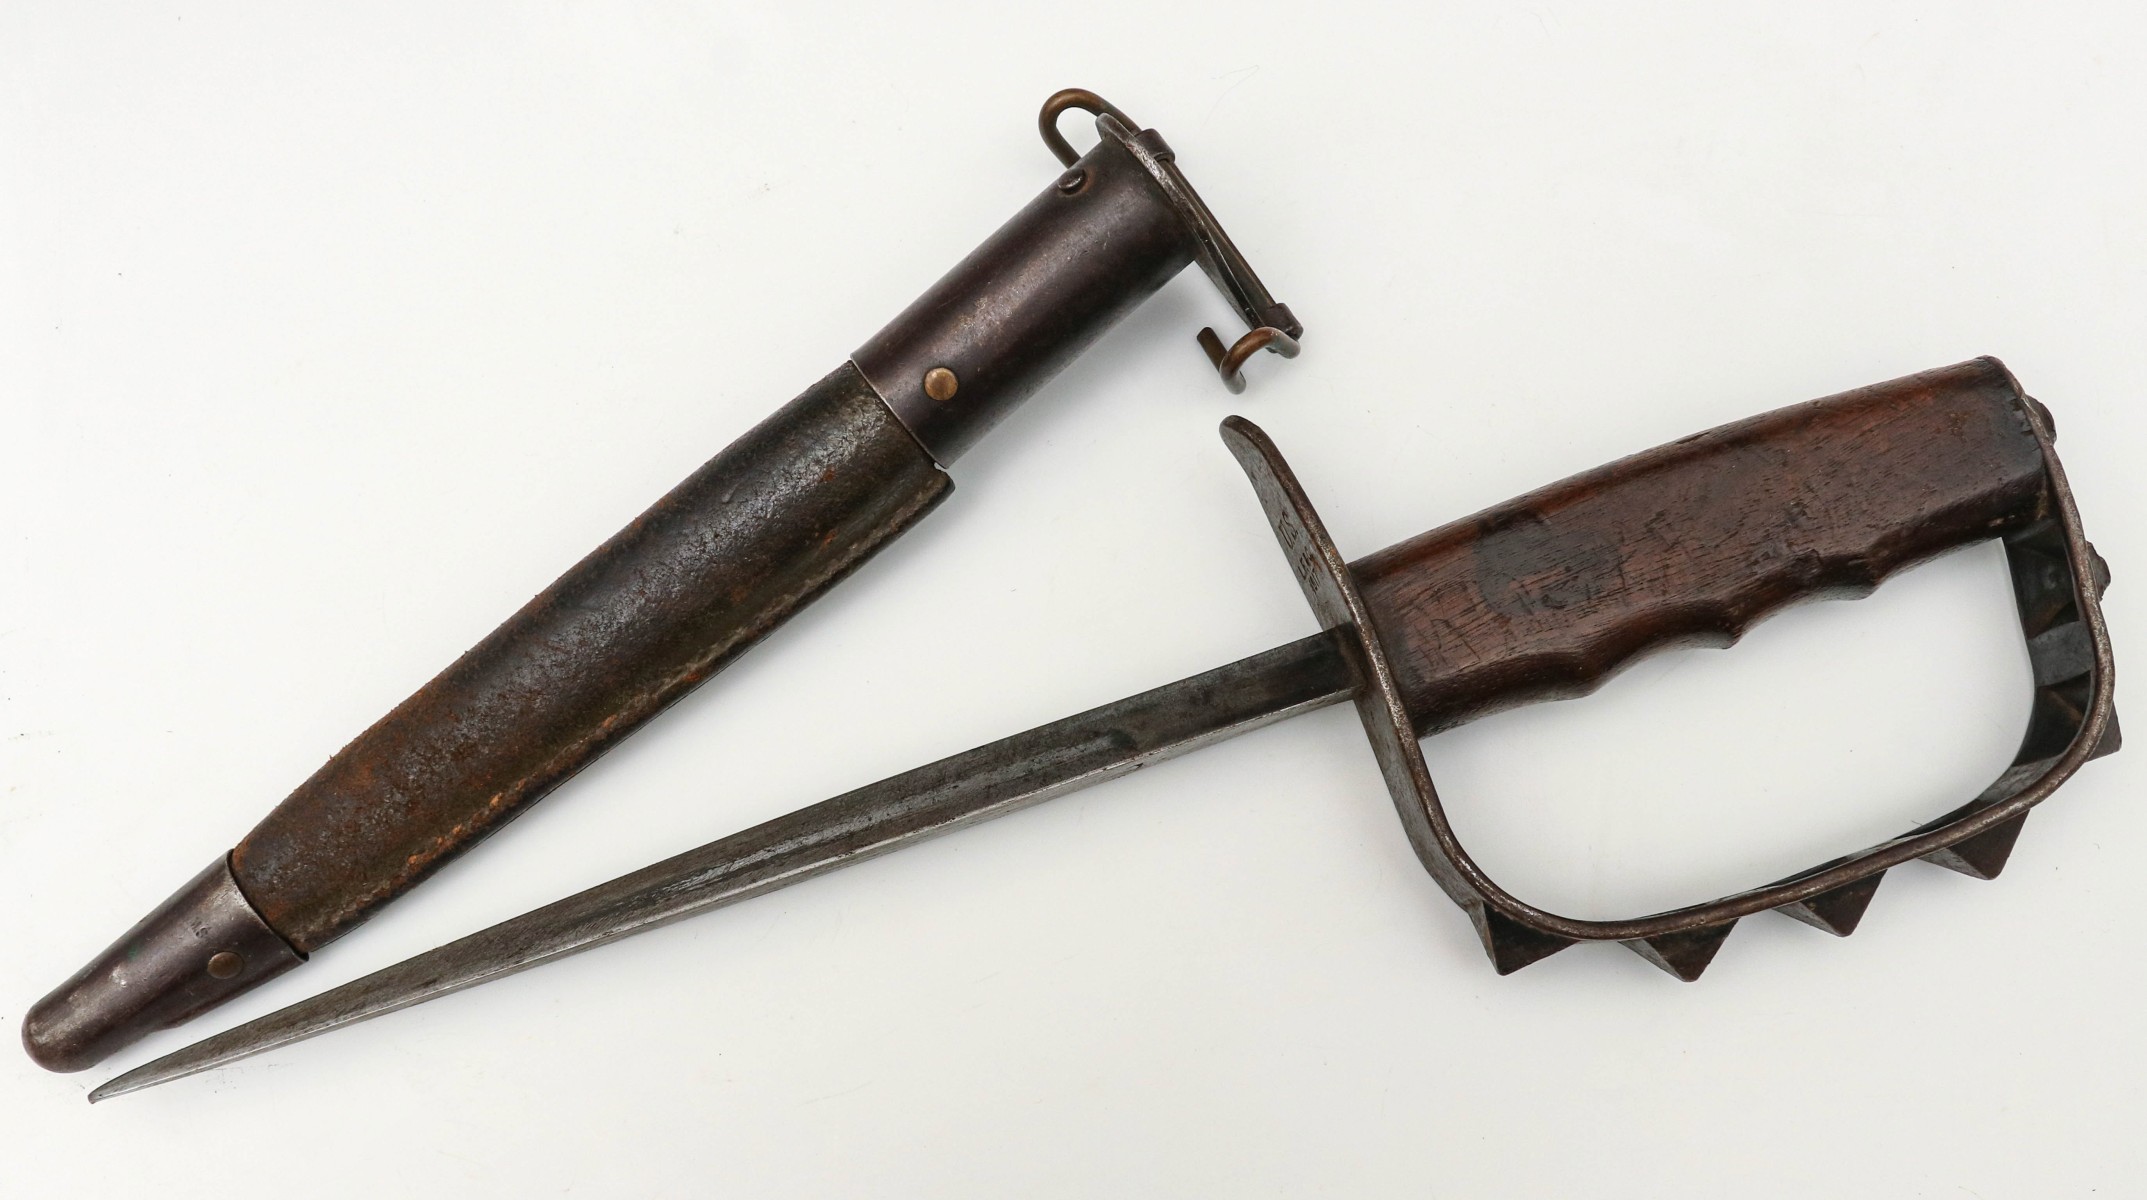 US ARMY WWI M-17 KNUCKLE DUSTER TRENCH KNIFE